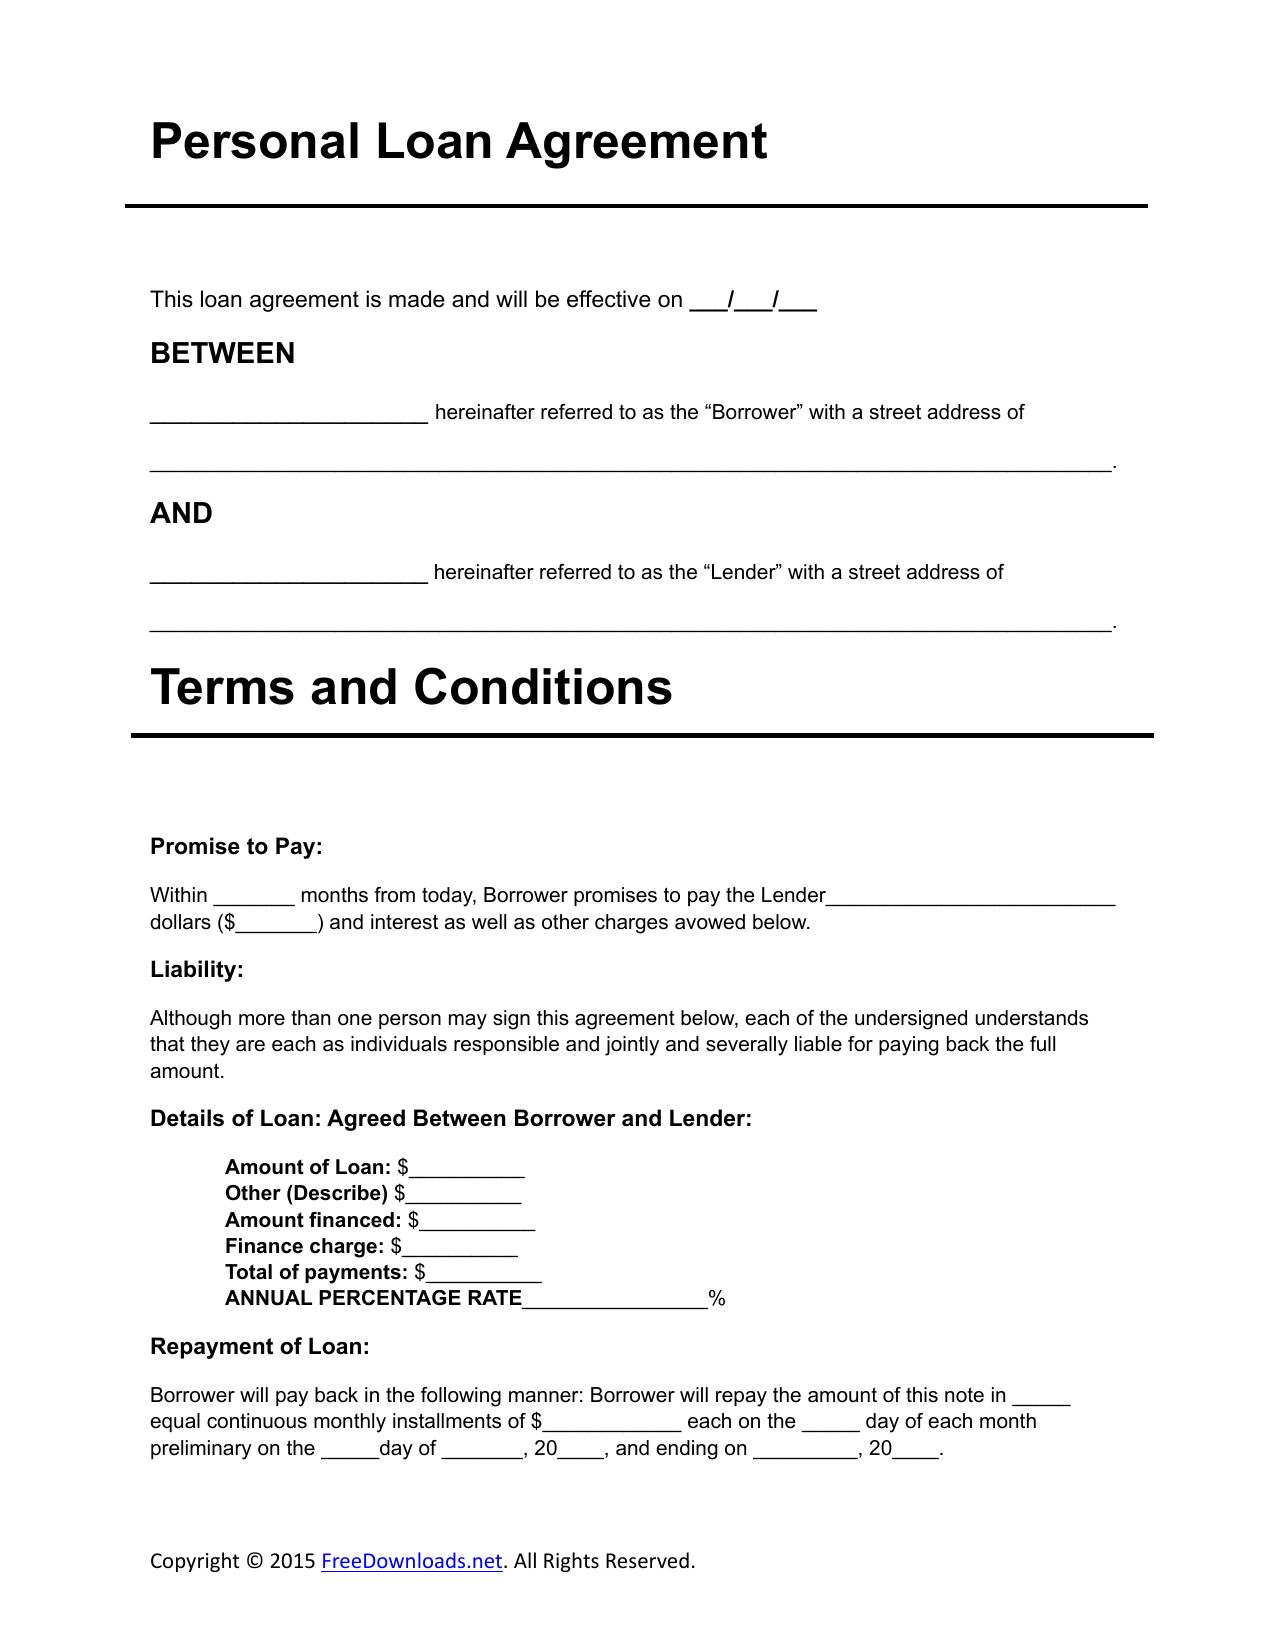 Download Personal Loan Agreement Template | PDF | RTF | Word 